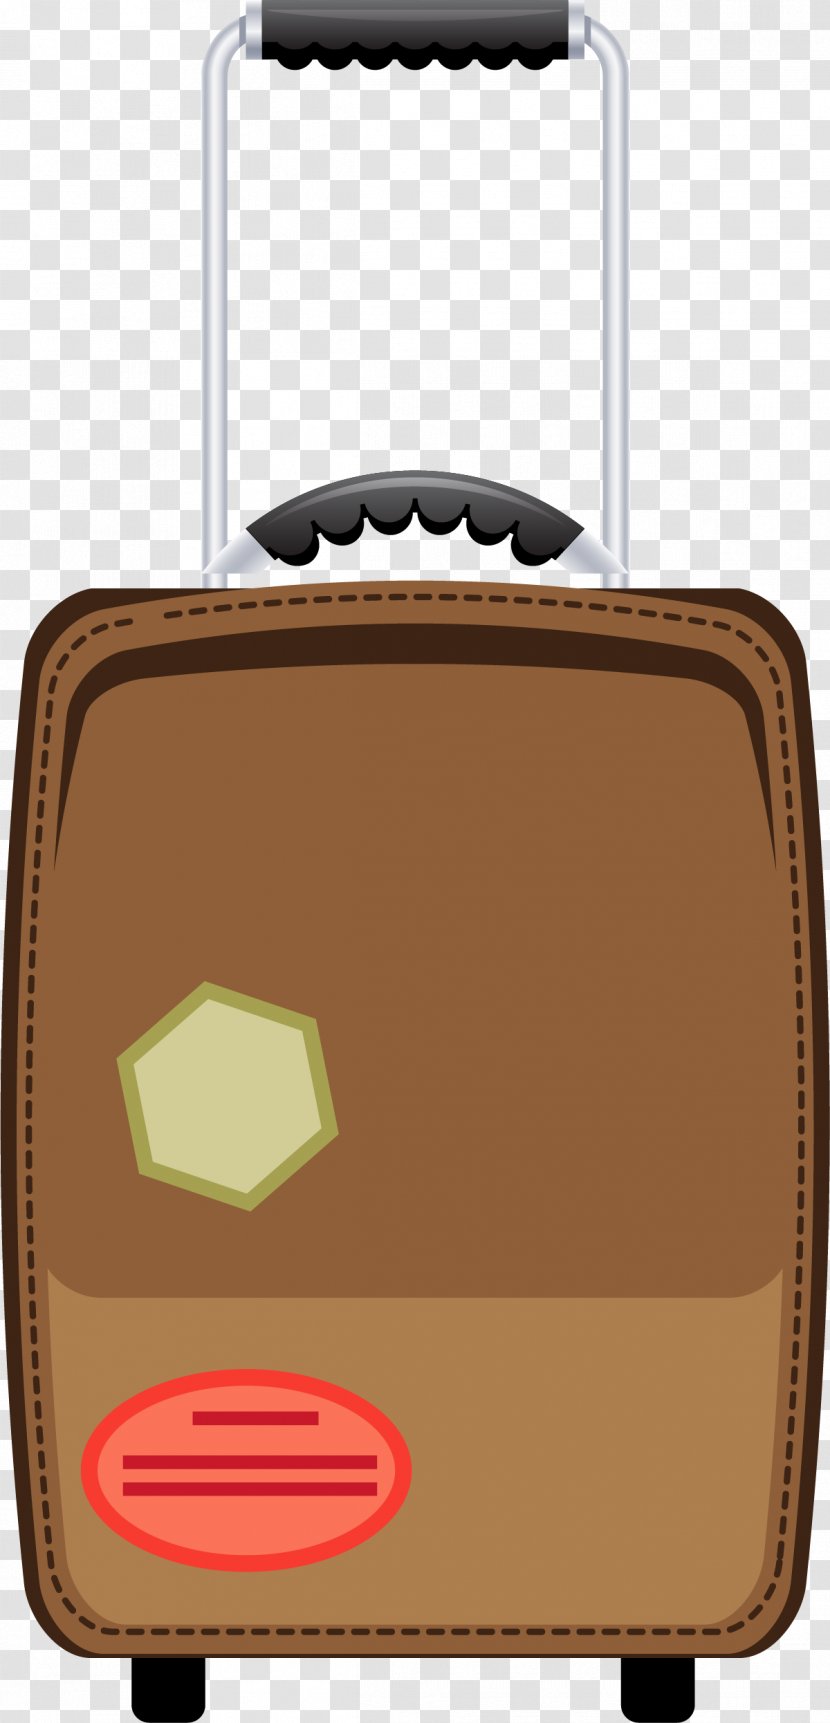 Guilin Suitcase Travel Baggage - Luggage Bags - Brown Tie Box Transparent PNG